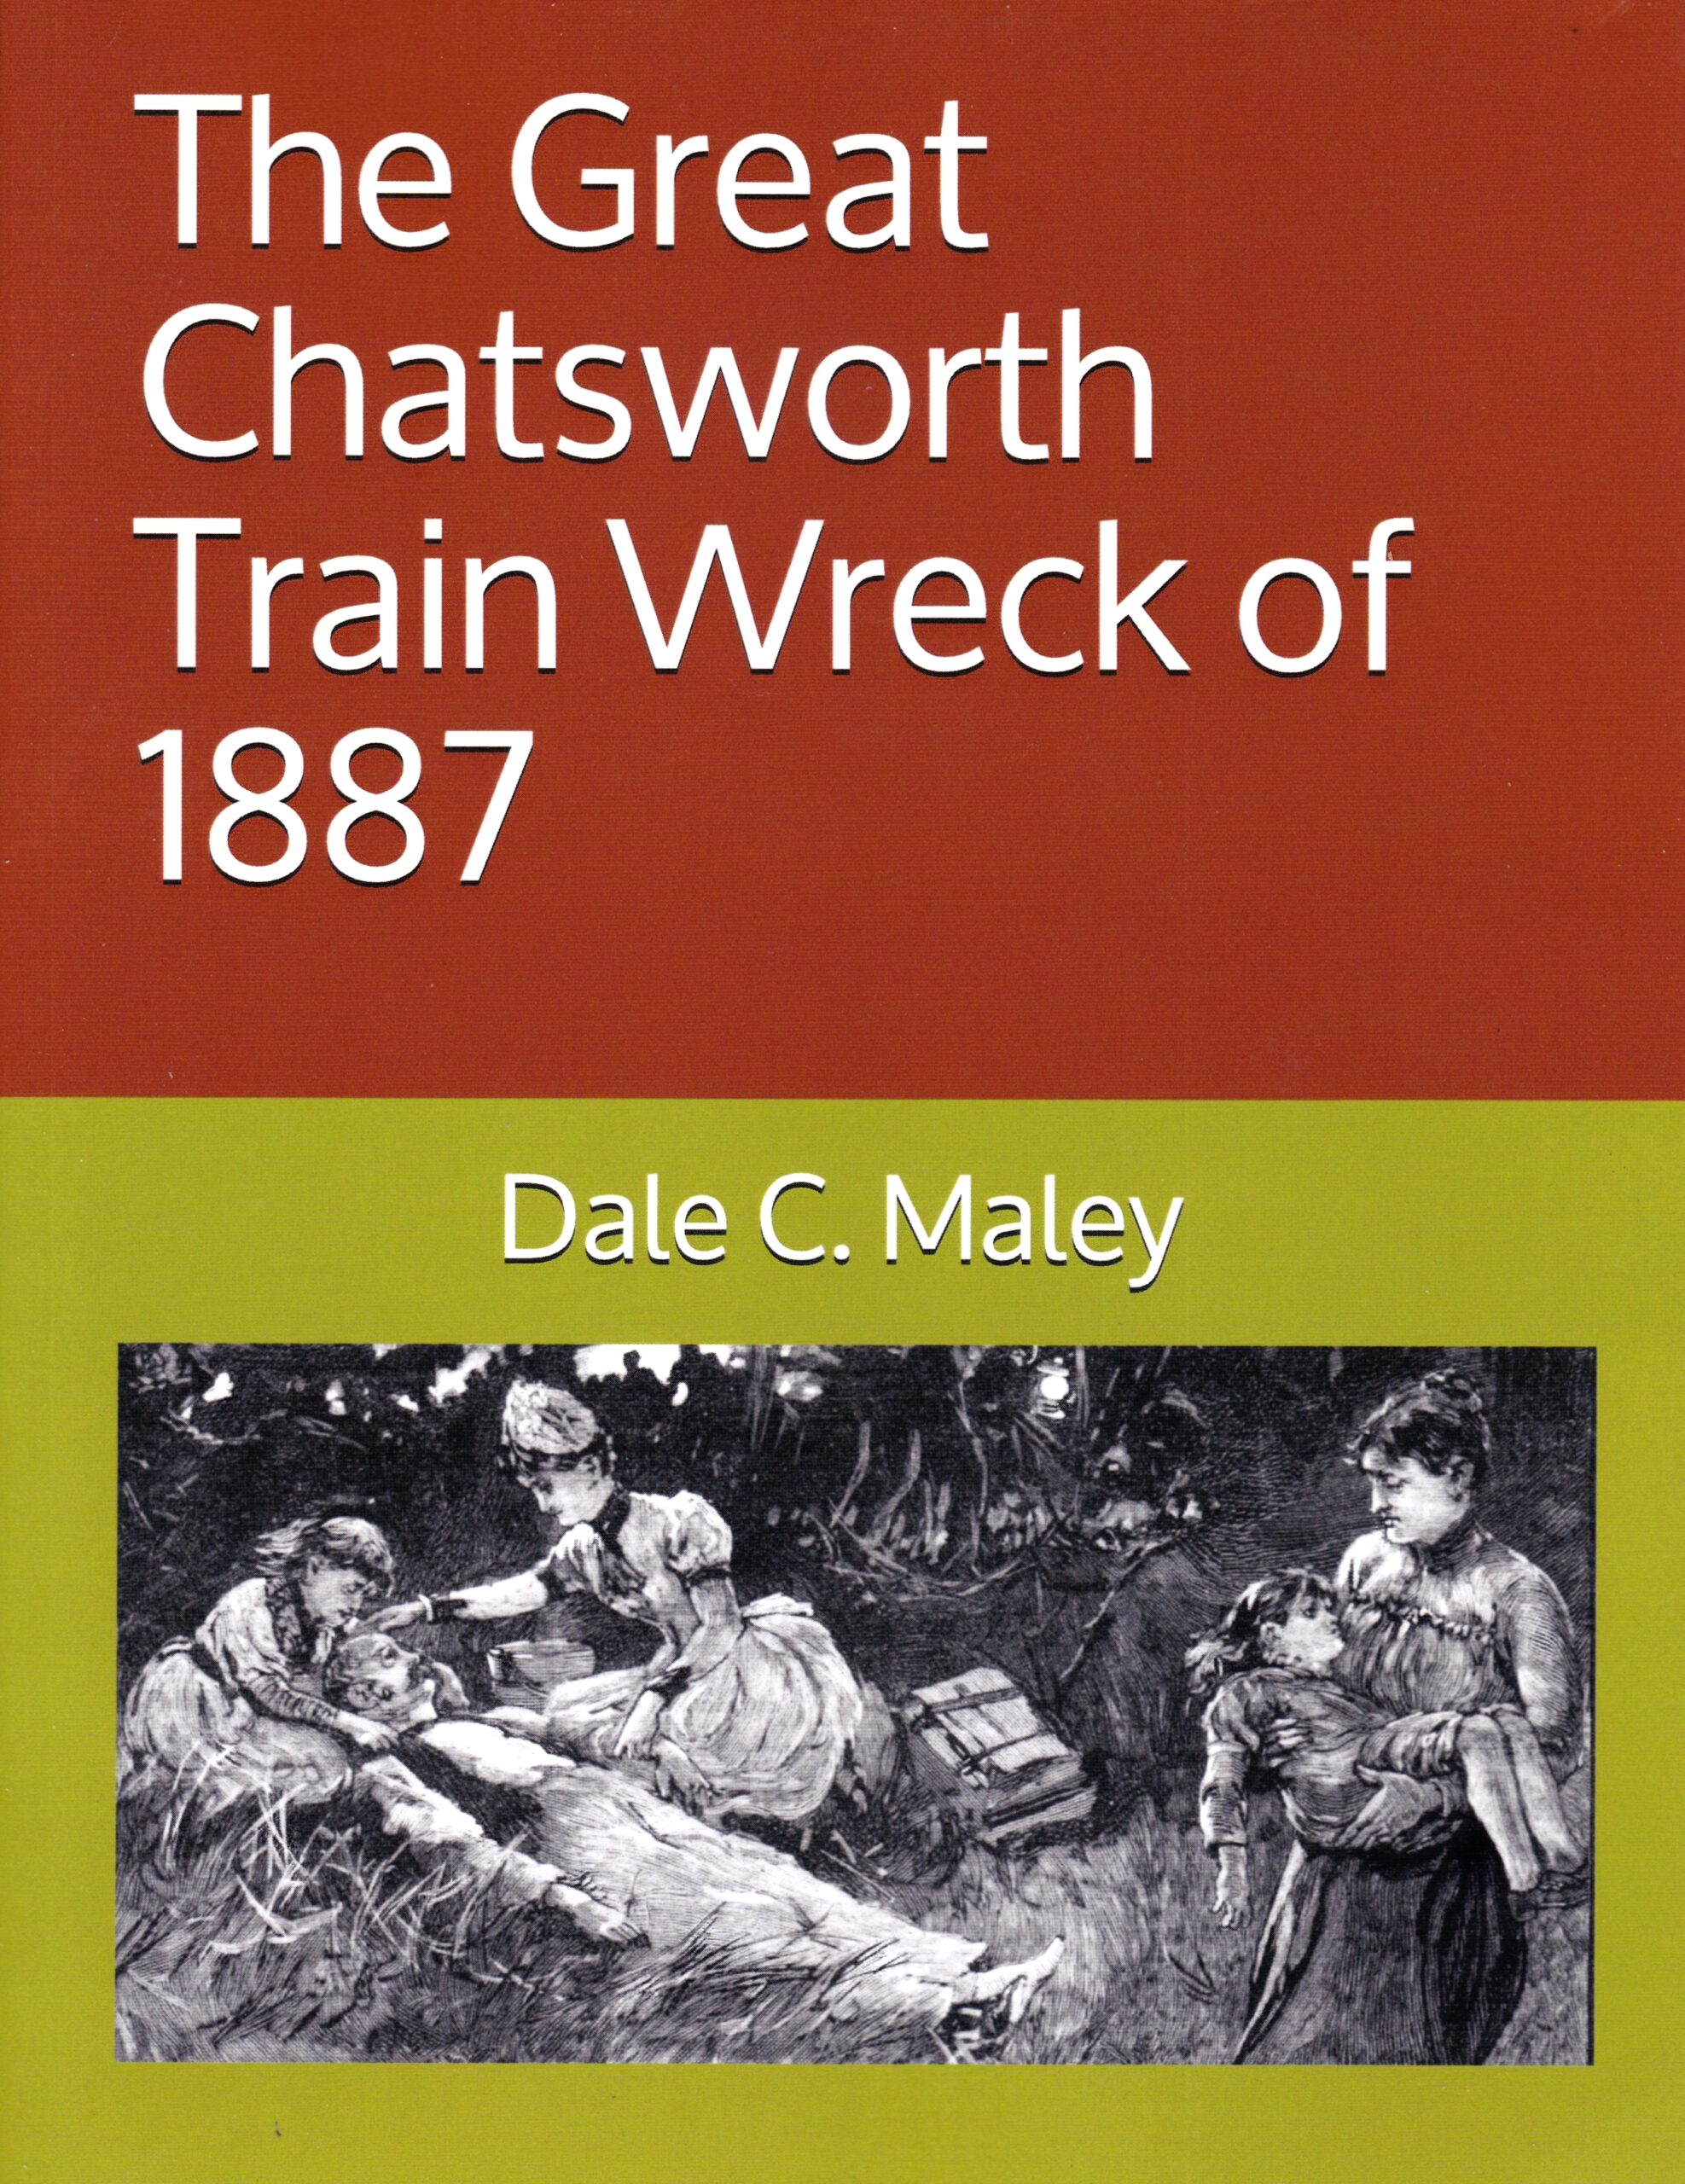 book cover - scanned - chatsworth train wreck